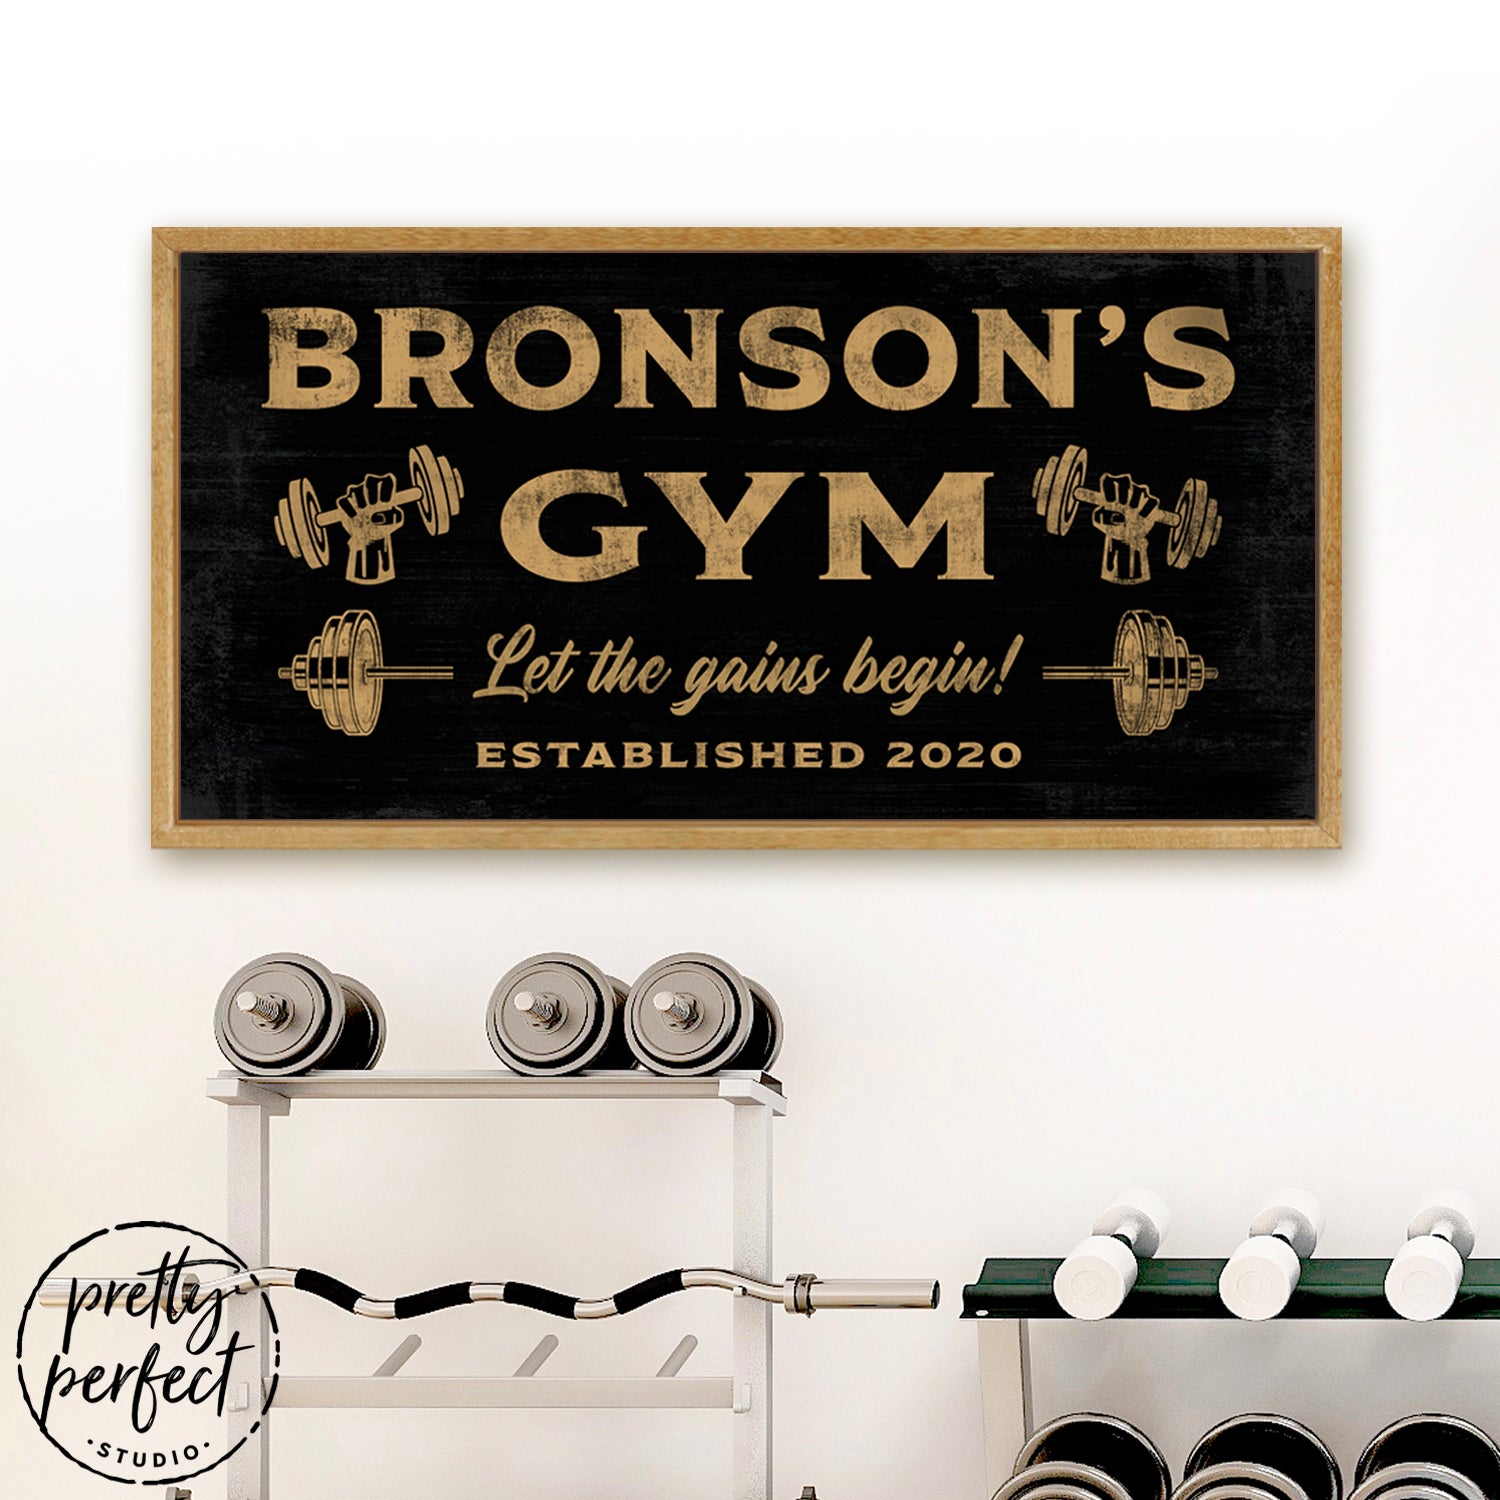 Custom Home Gym Sign Hanging in Fitness Room - Pretty Perfect Studio